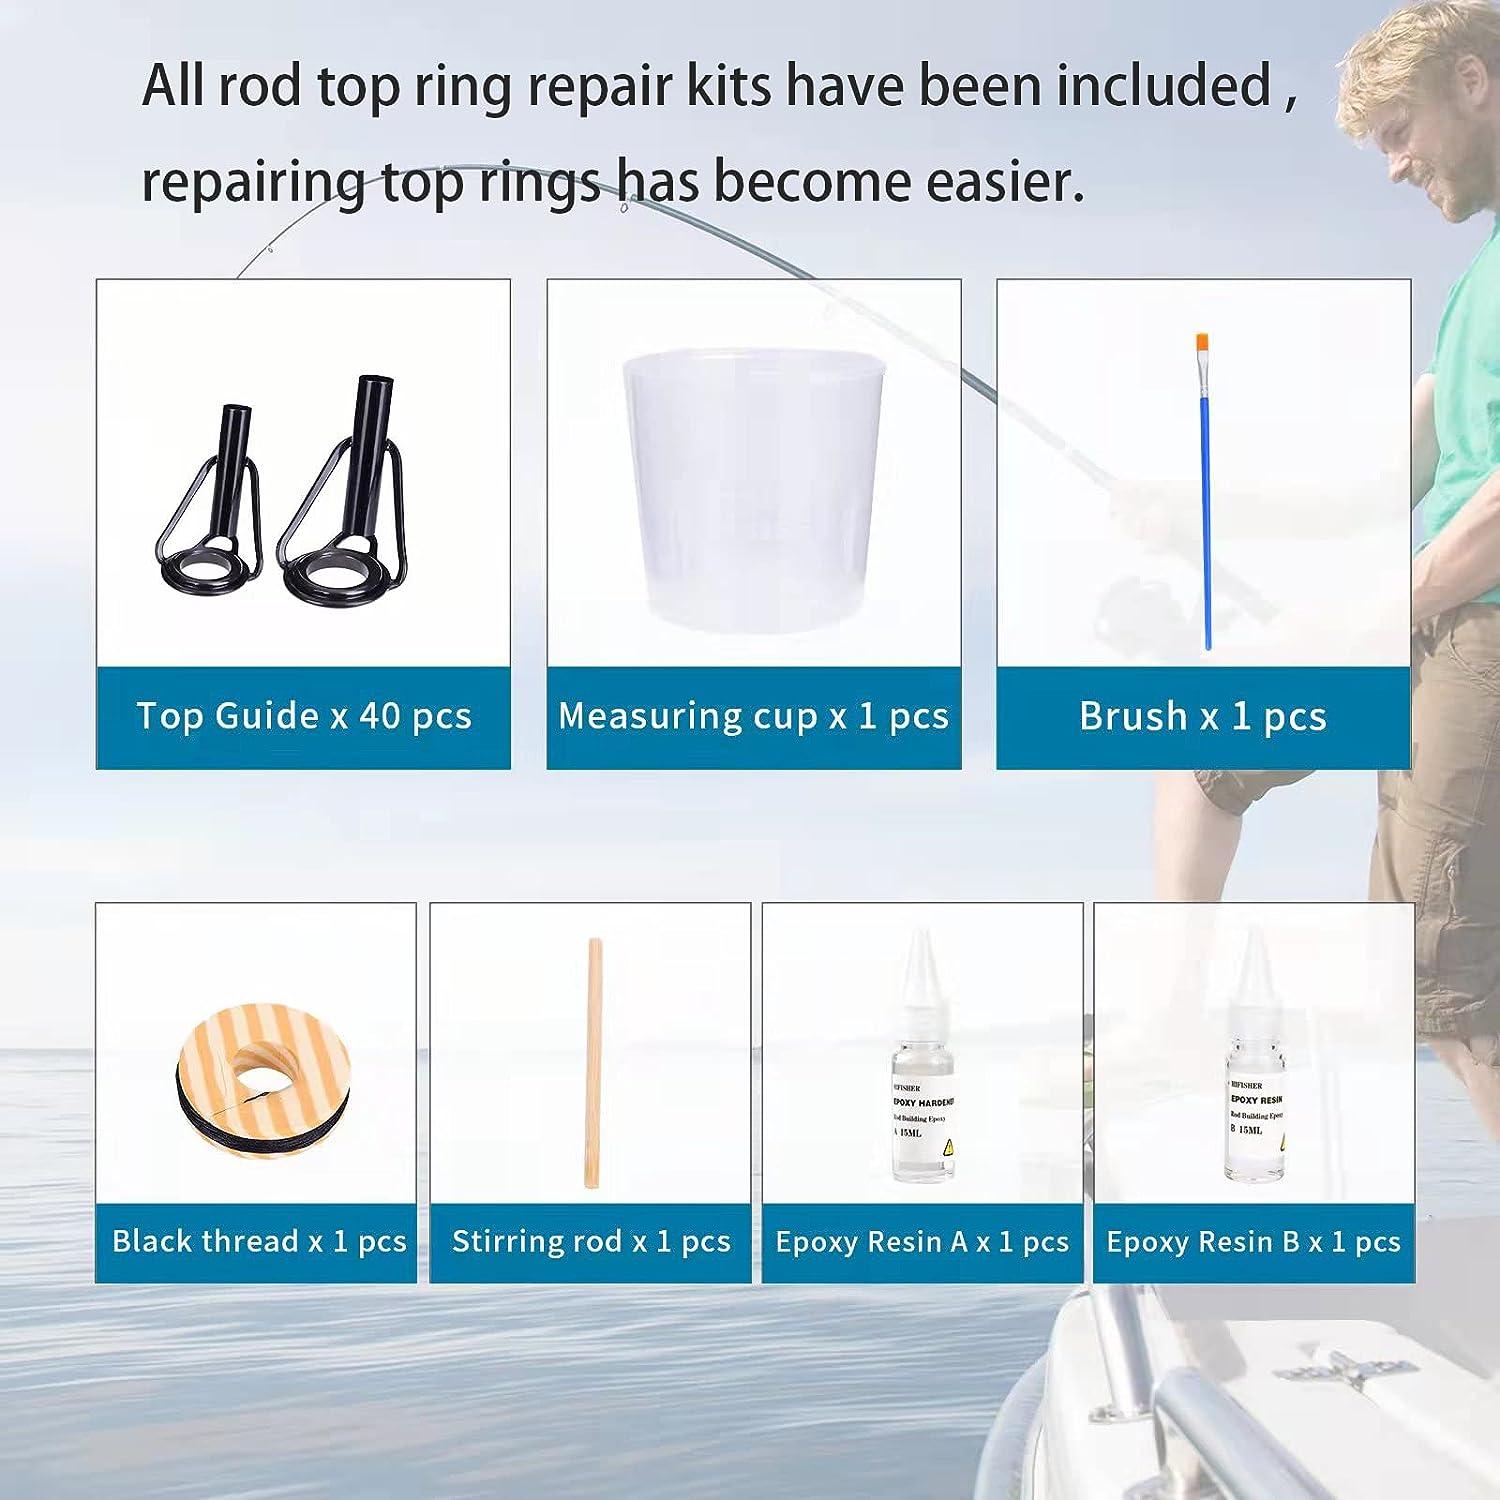 Hifisher Fishing Rod Tip Repair Kit: 40pcs 8 Sizes Top Guides ,1oz Epoxy  Resin, Brush, Measure Cup, Fishing Rod Guides Replacement kit, Stainless  Steel Ceramic Ring Guide Tips